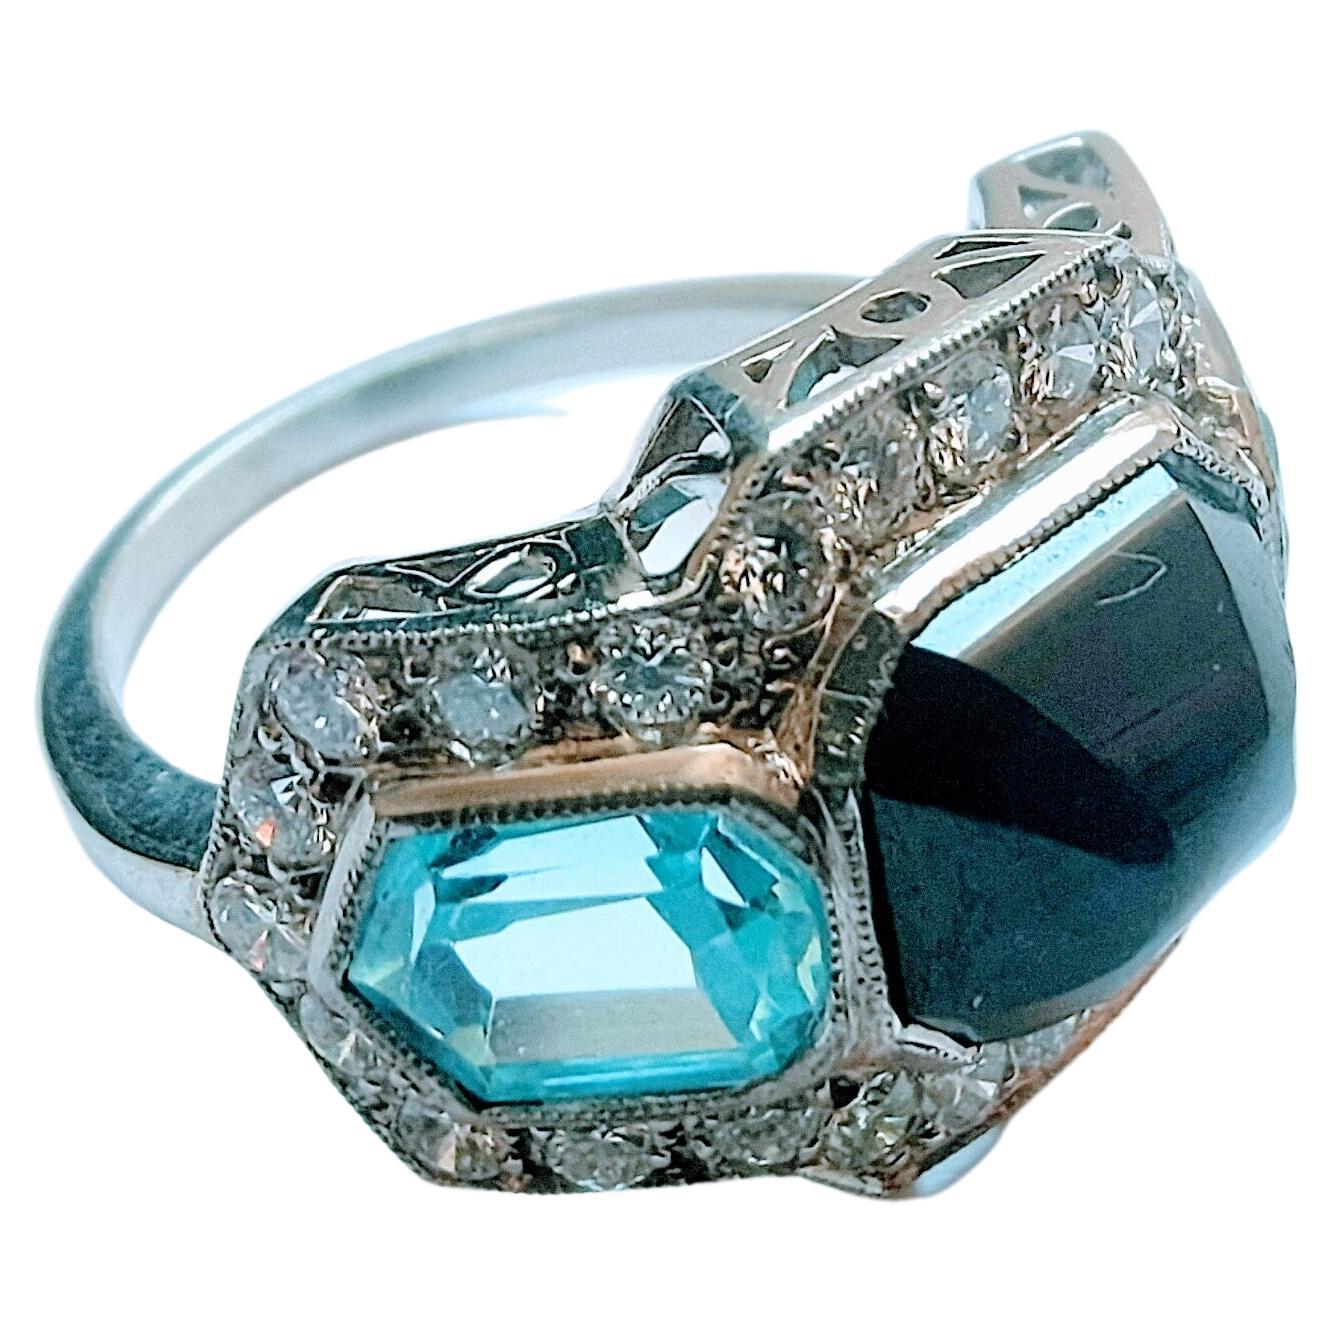 Beautiful symmetrical ring made of platinum weight 6.78 grams, with beautiful openwork drawings on the sides. Central sapphire cut cabochon sugar loaf, measure 9.68x 8.25x 4.82 millimeters, weight 3.85 cts. With two seawater of beautiful light blue 